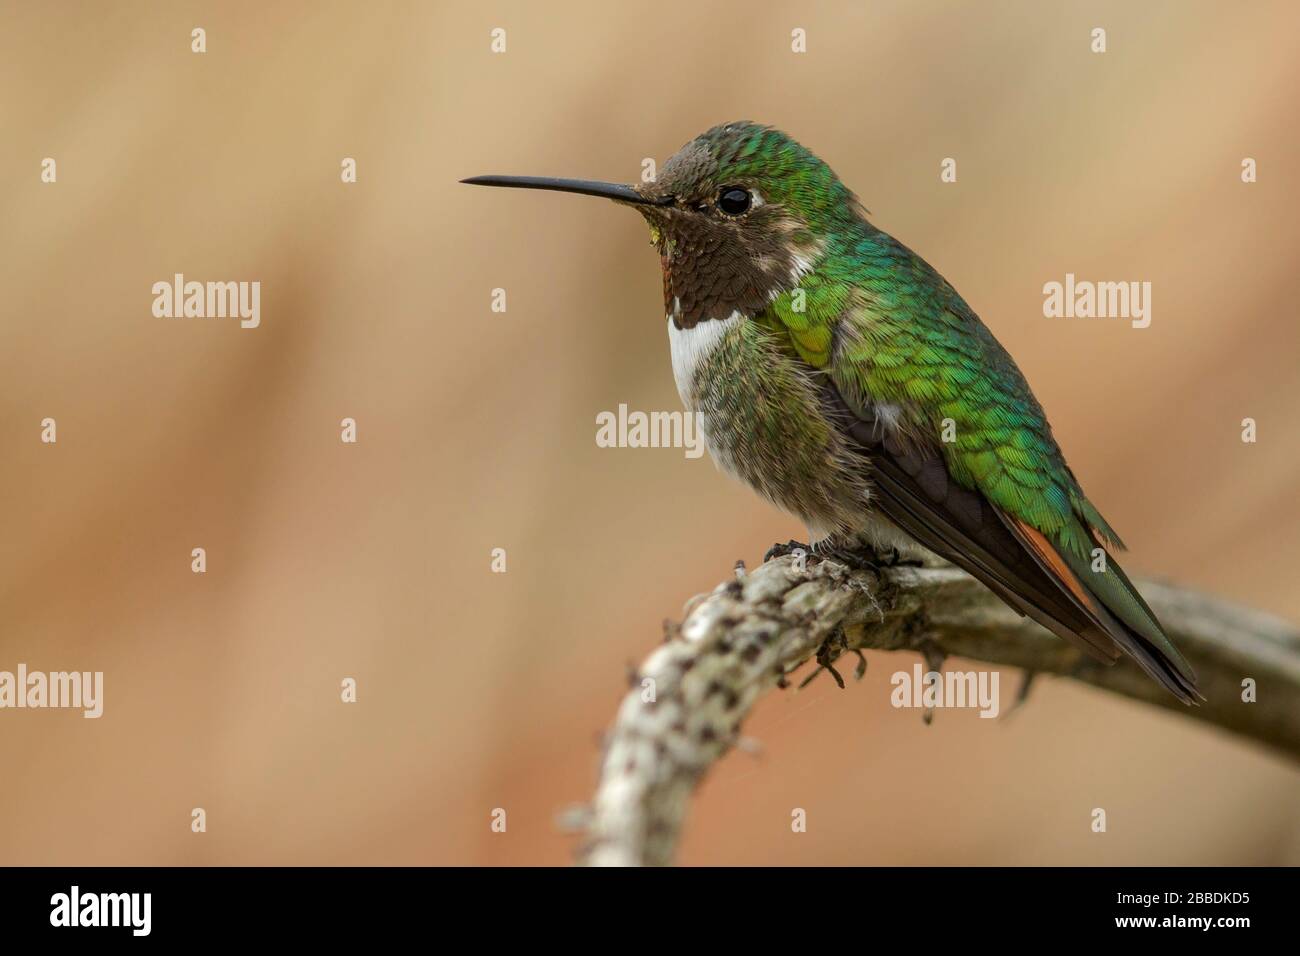 Broad-tailed Hummingbird (Selasphorus platycercus) perched on a branch in Guatemala in Central America. Stock Photo